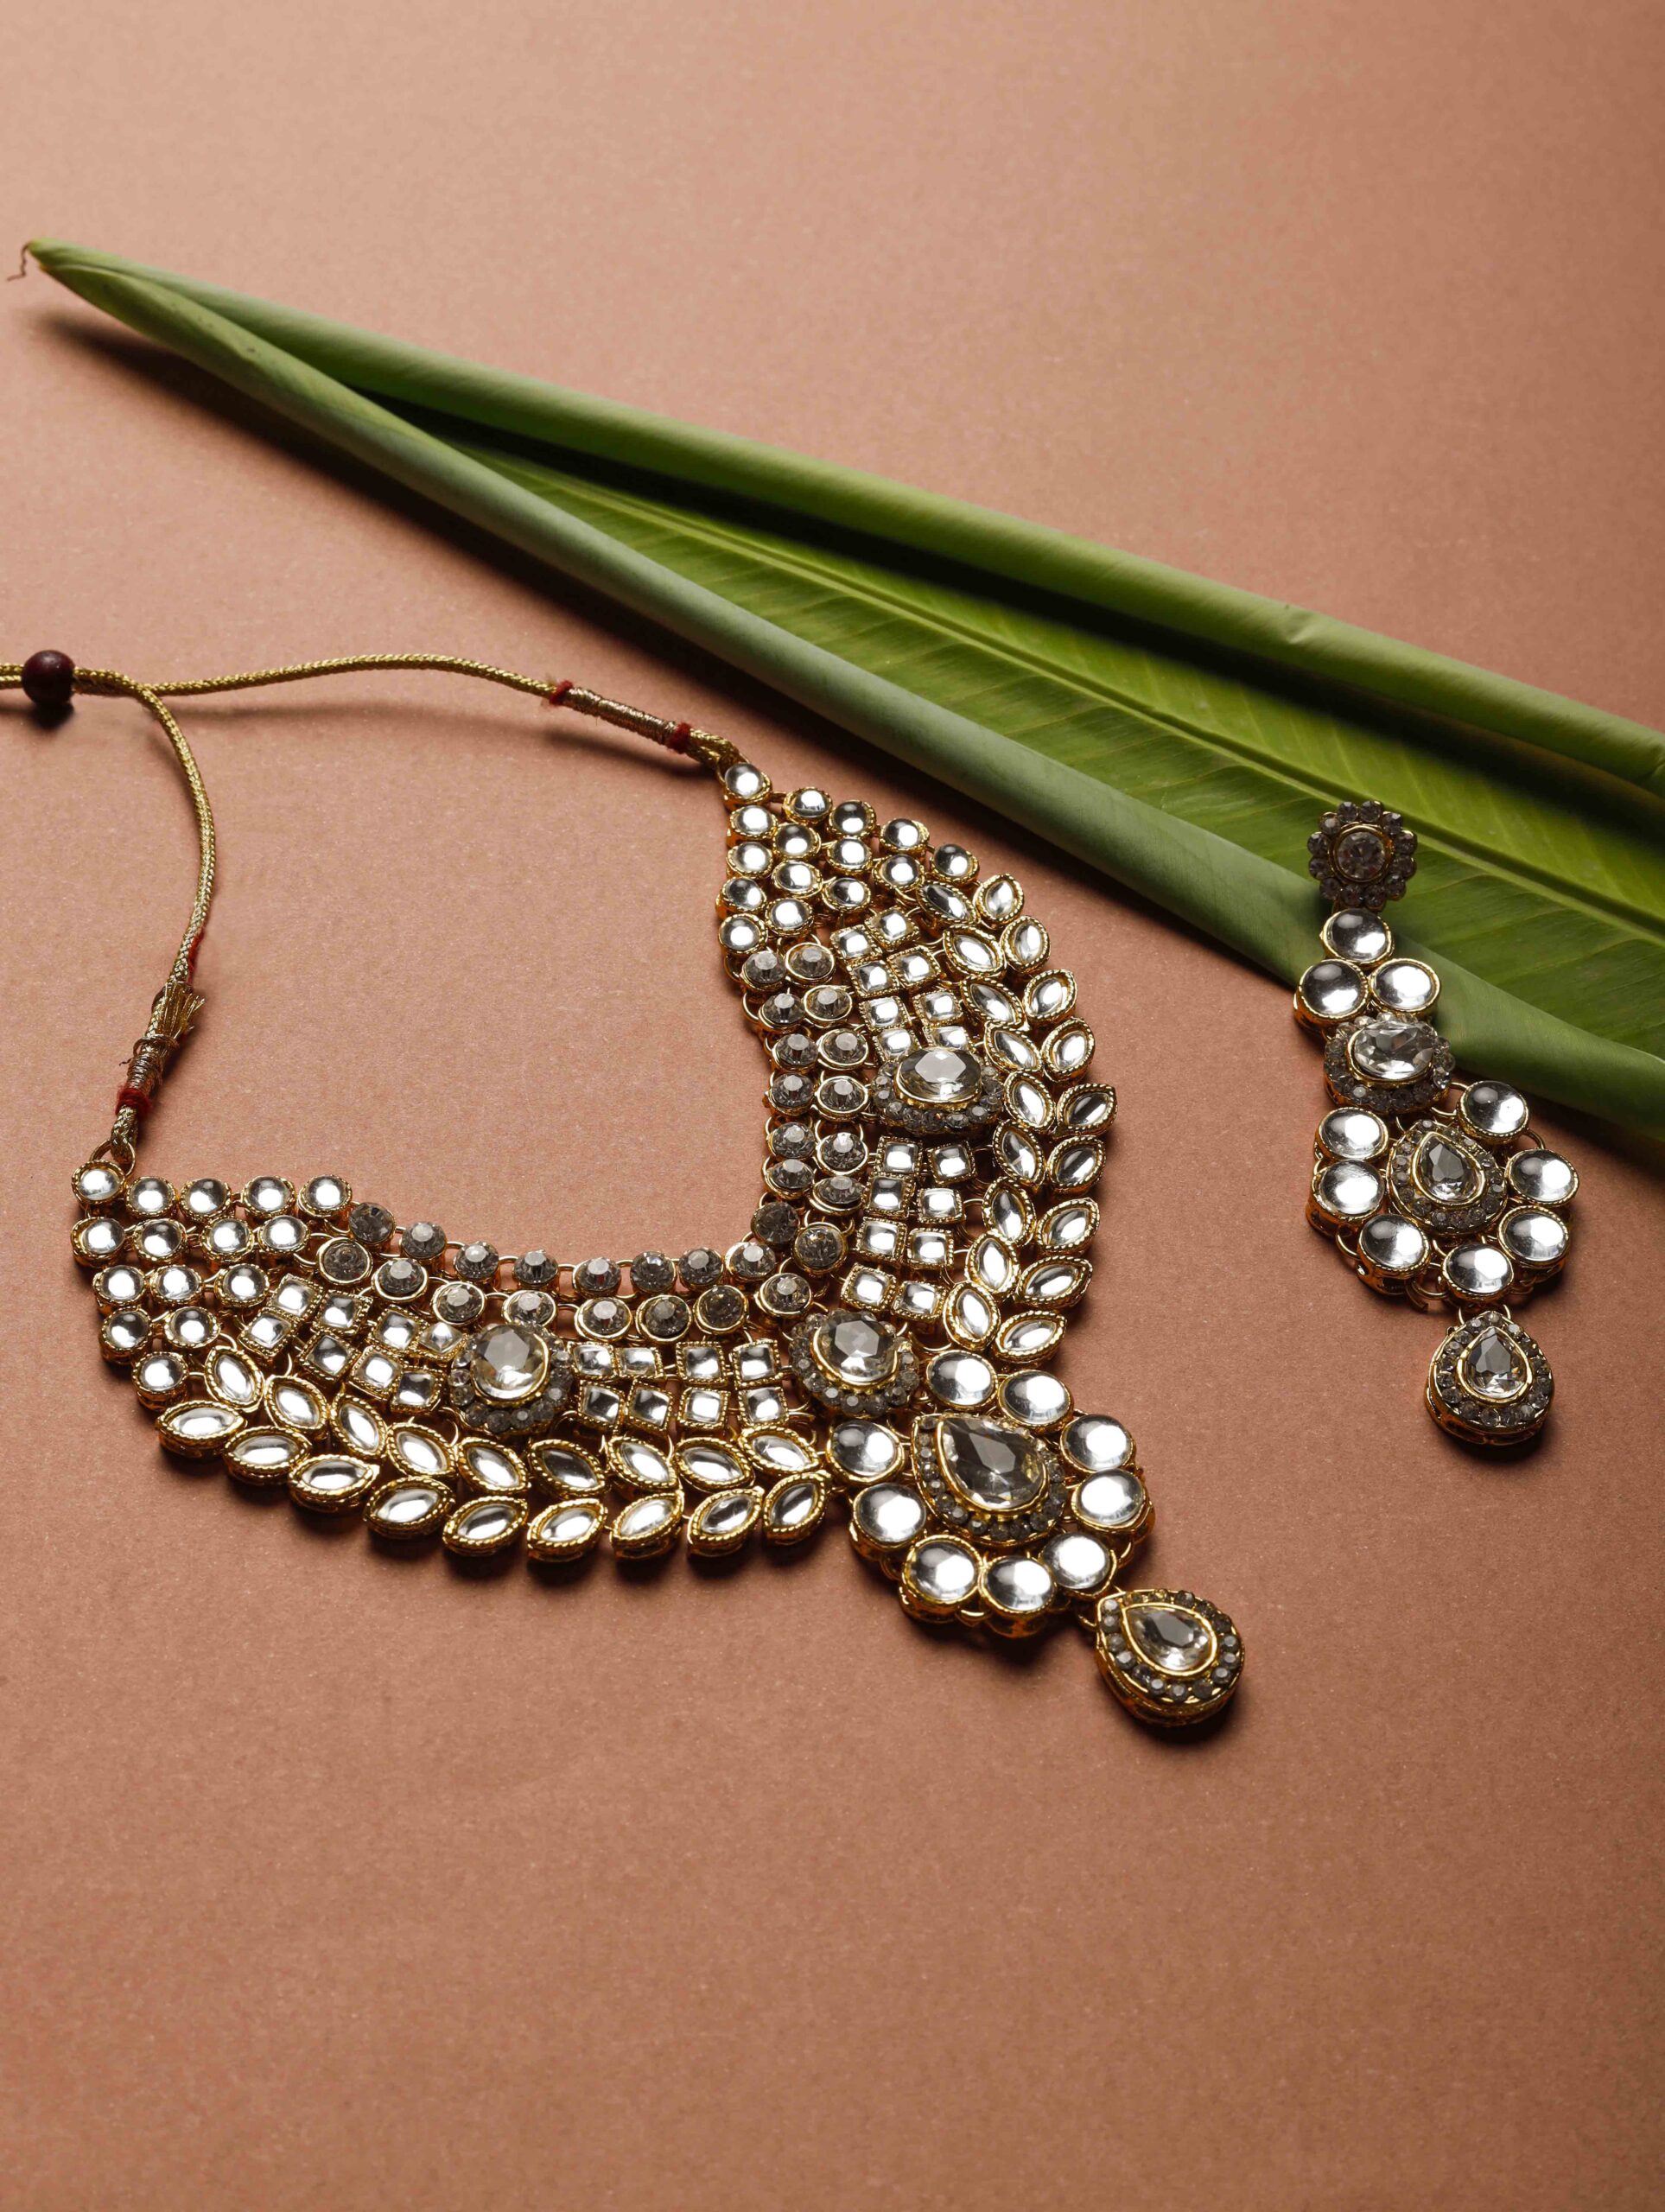 The Tradtional Bridal Kundan Jewellery Set is inspired from the ancient rajwadi maharani Jewellery but with a twist for the modern Indian bride.